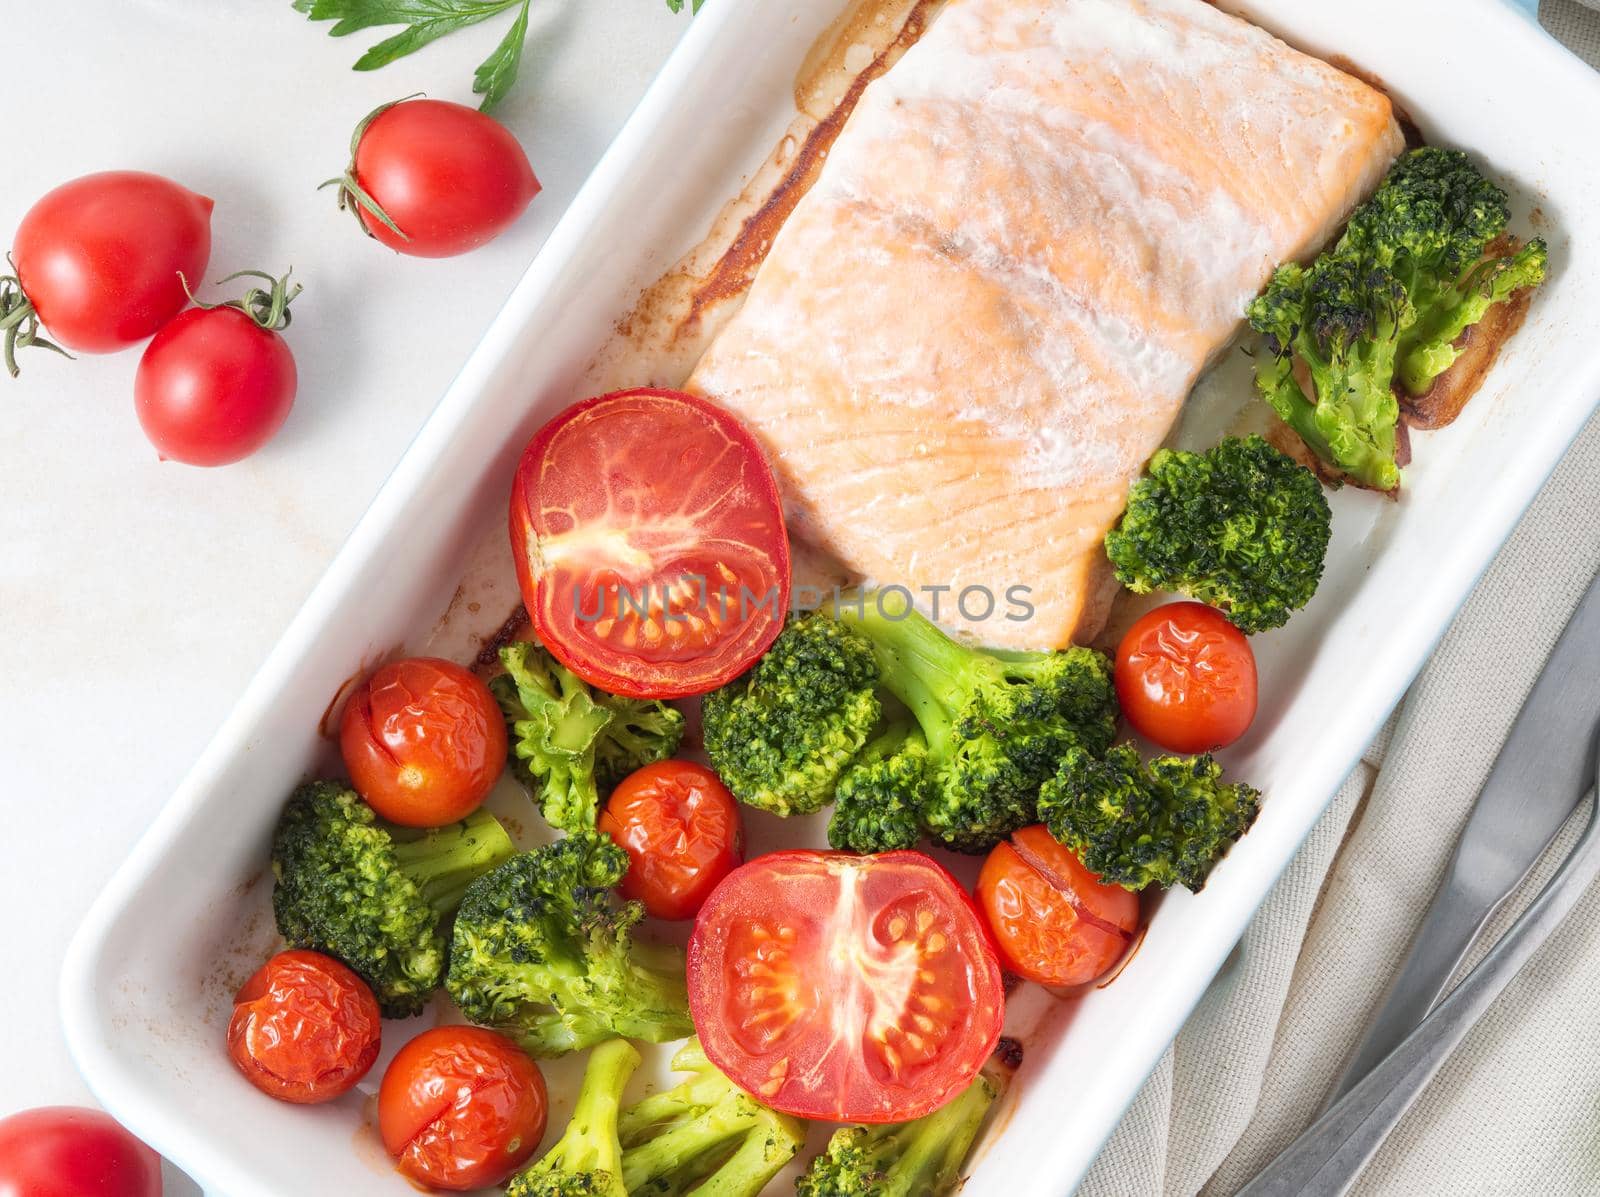 Fish salmon baked in oven with vegetables - broccoli, tomatoes. Healthy diet food, white marble backdrop, top view, close-up